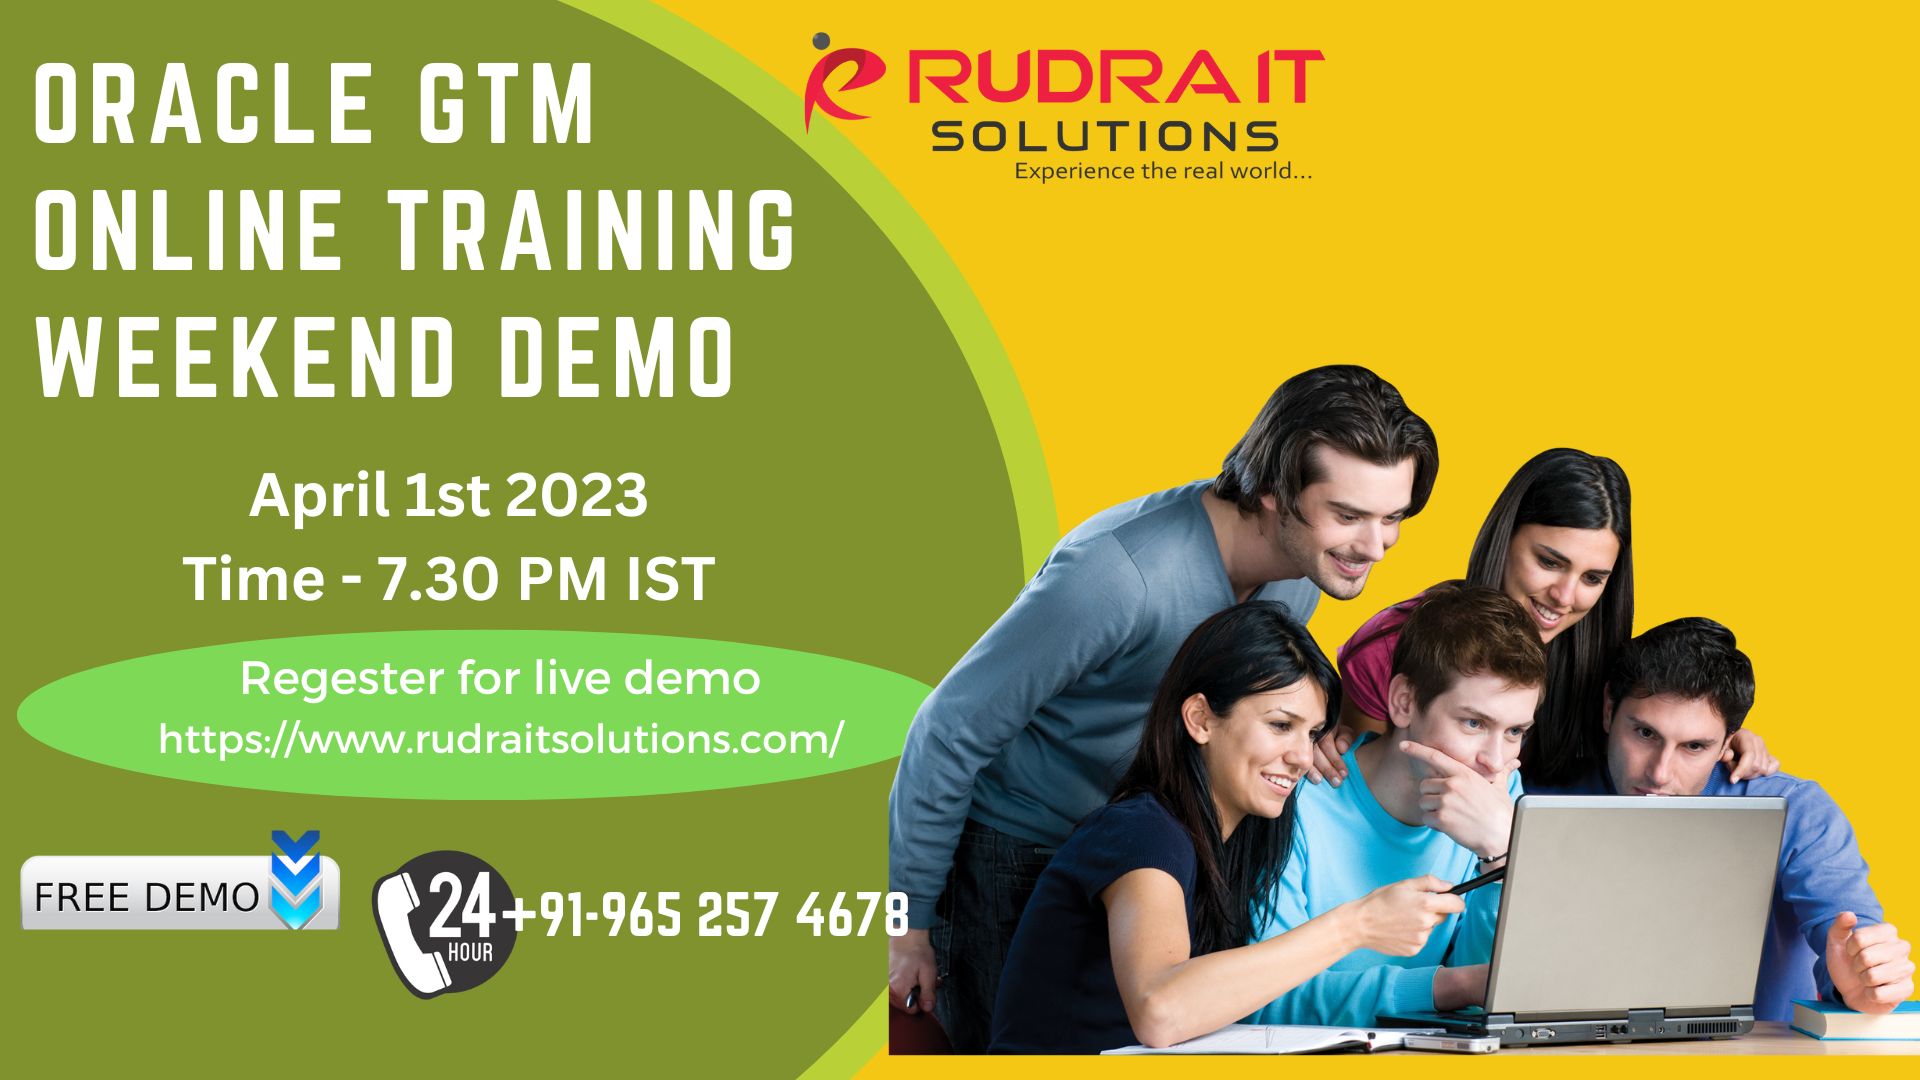 Oracle GTM Online Training Demo